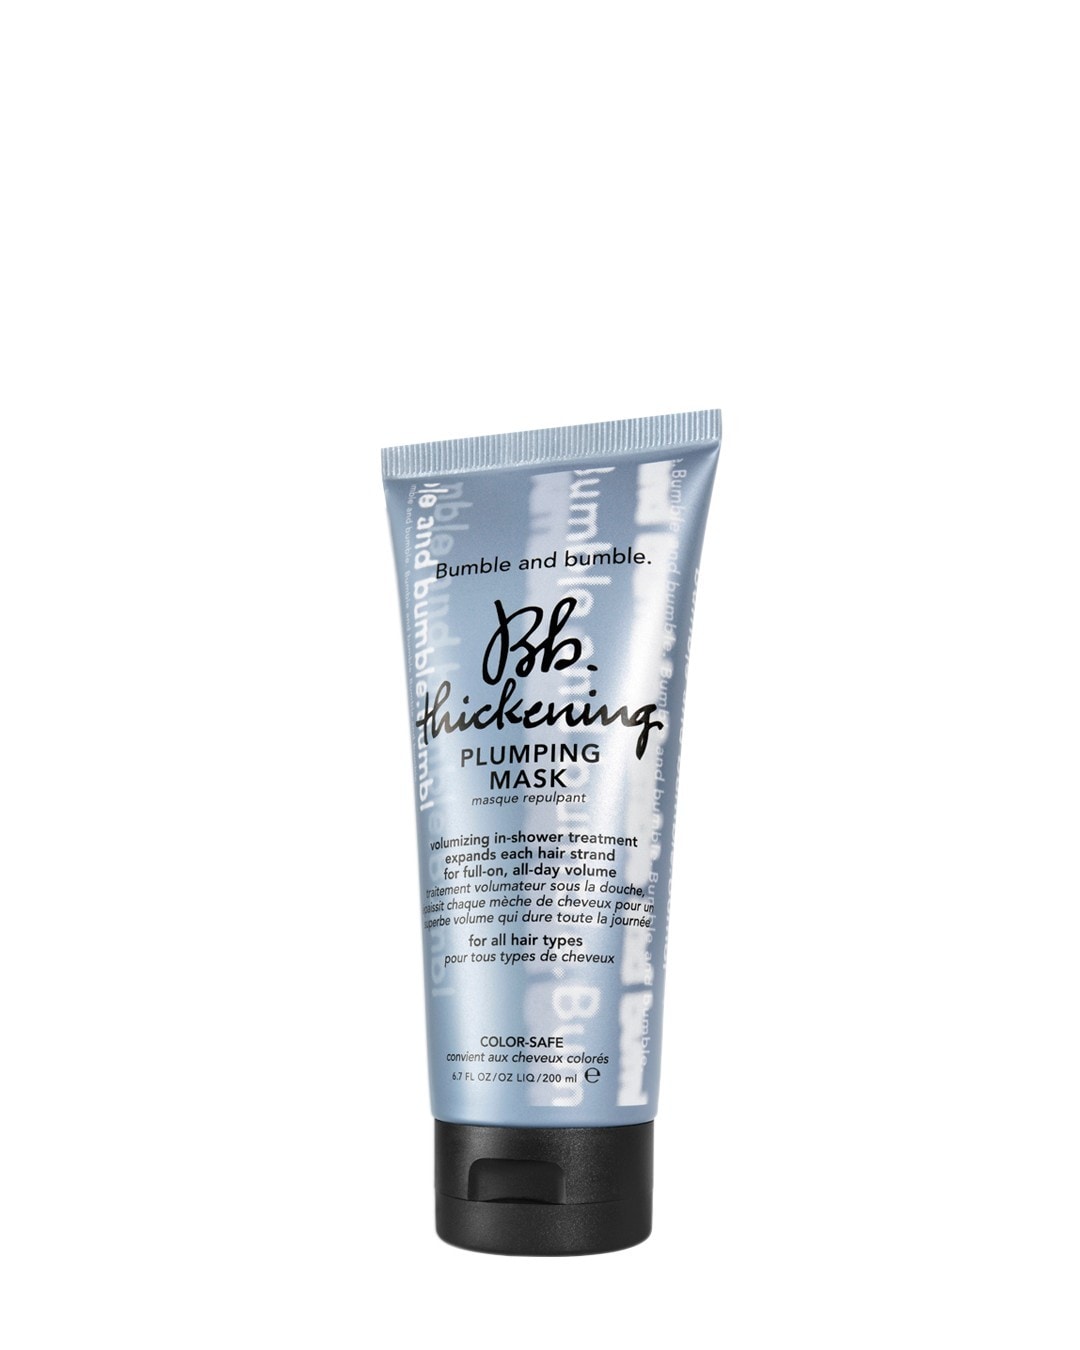 Bumble and bumble. Thickening Plumping Mask, 